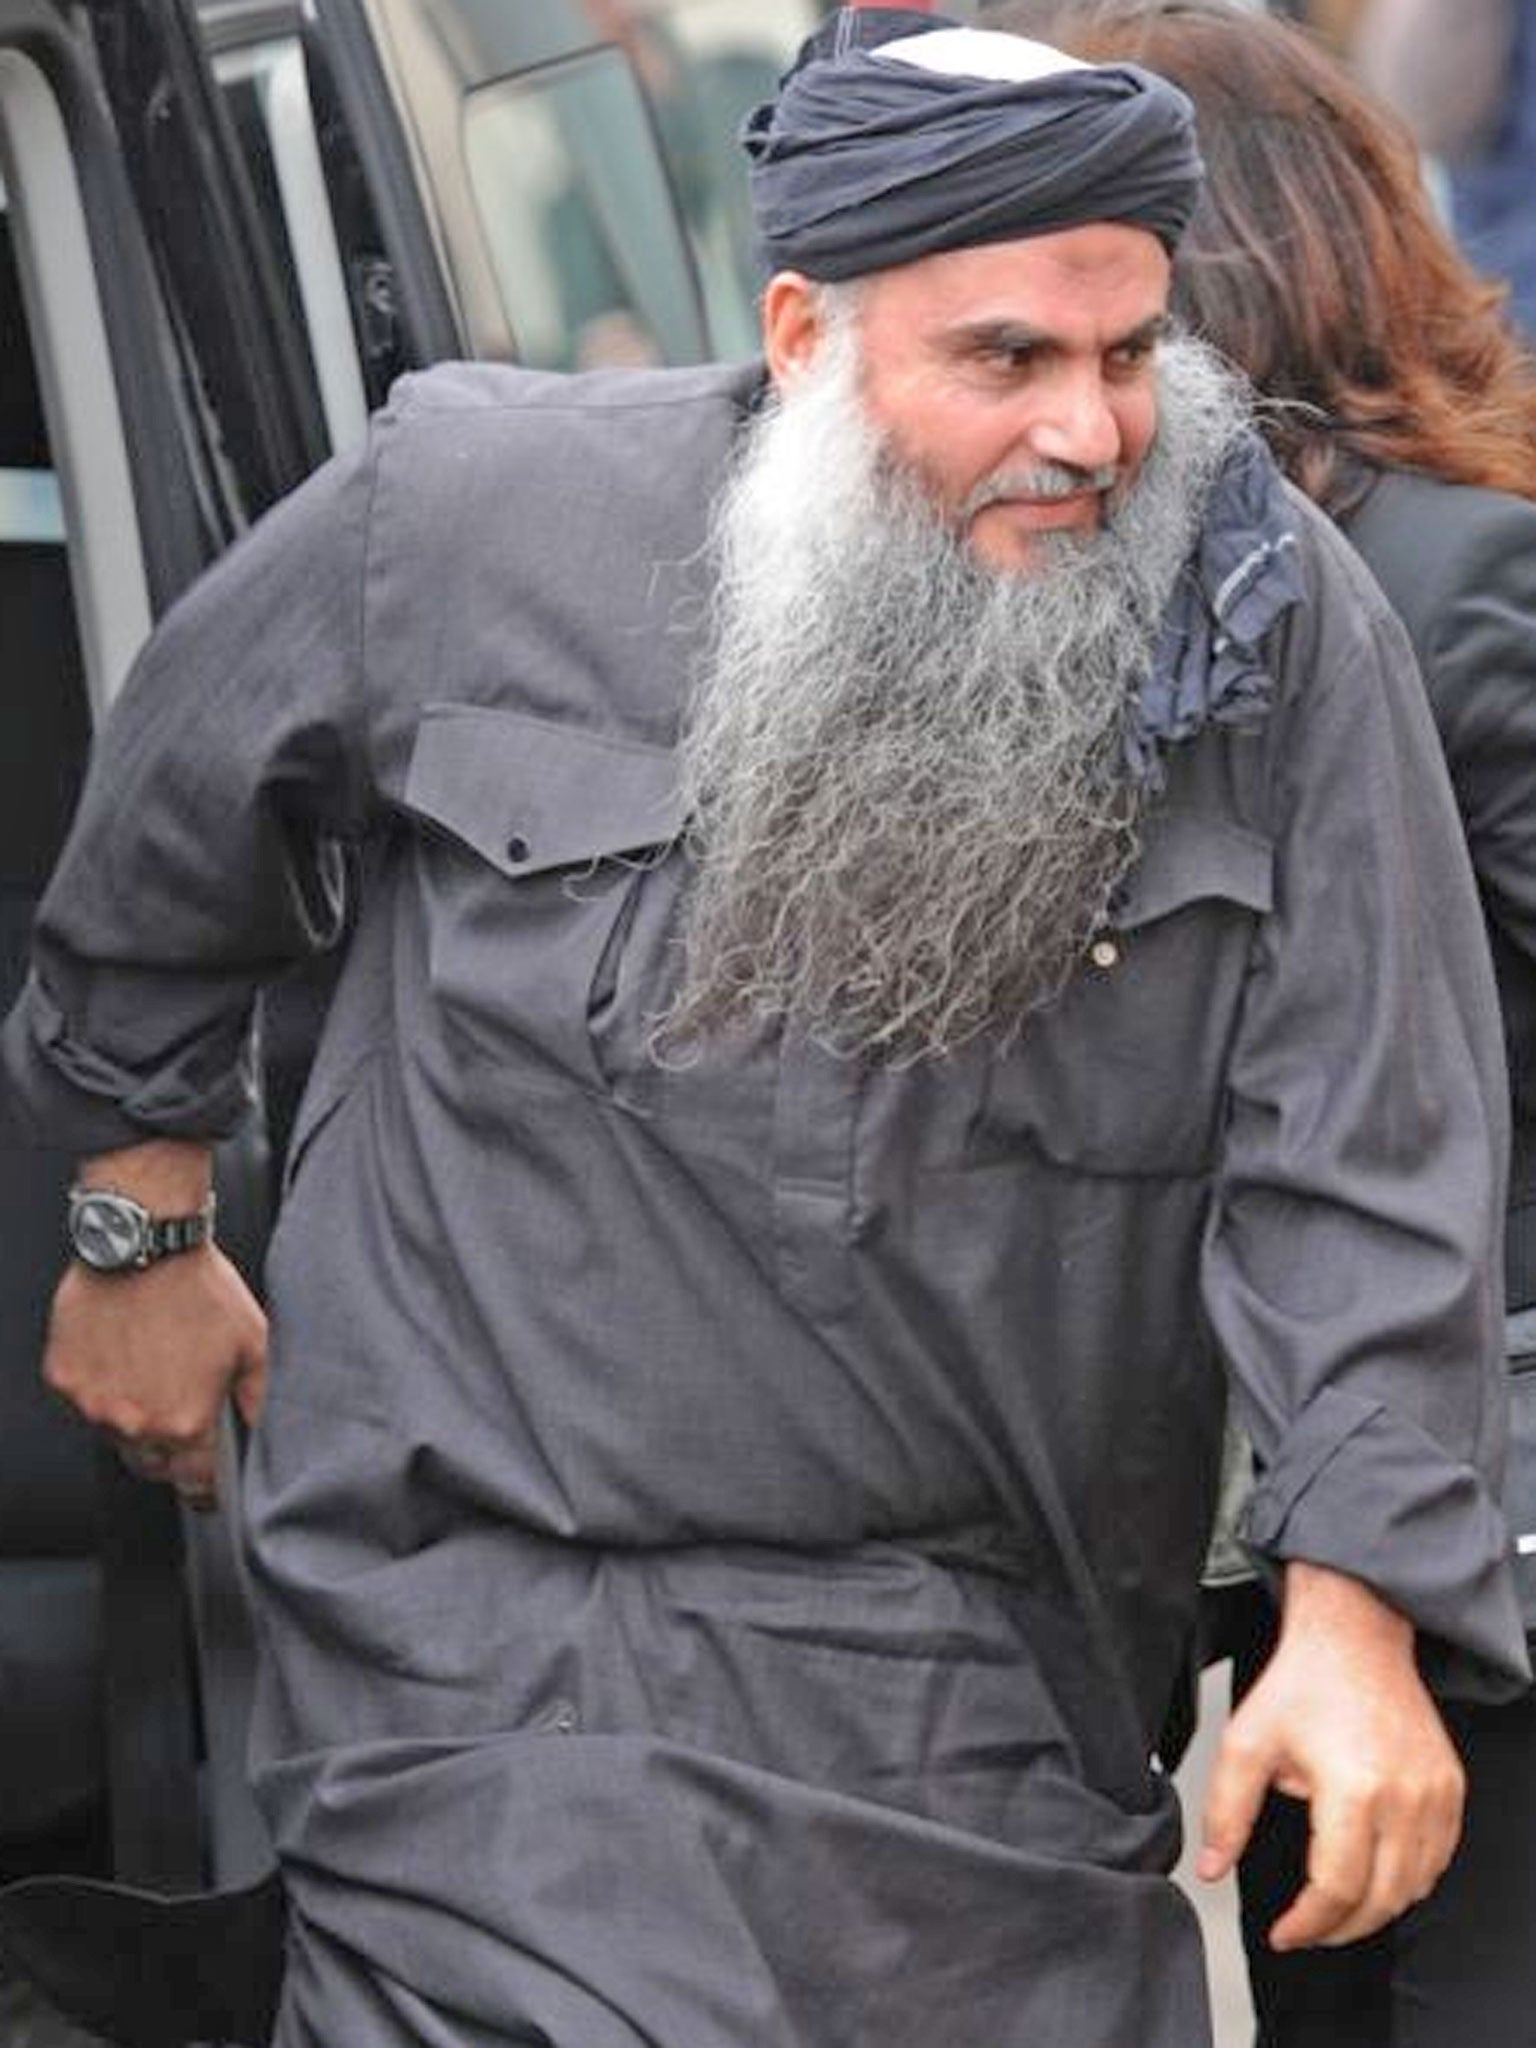 The family of the radical preacher Abu Qatada has won an injunction preventing protesters from demonstrating outside their home